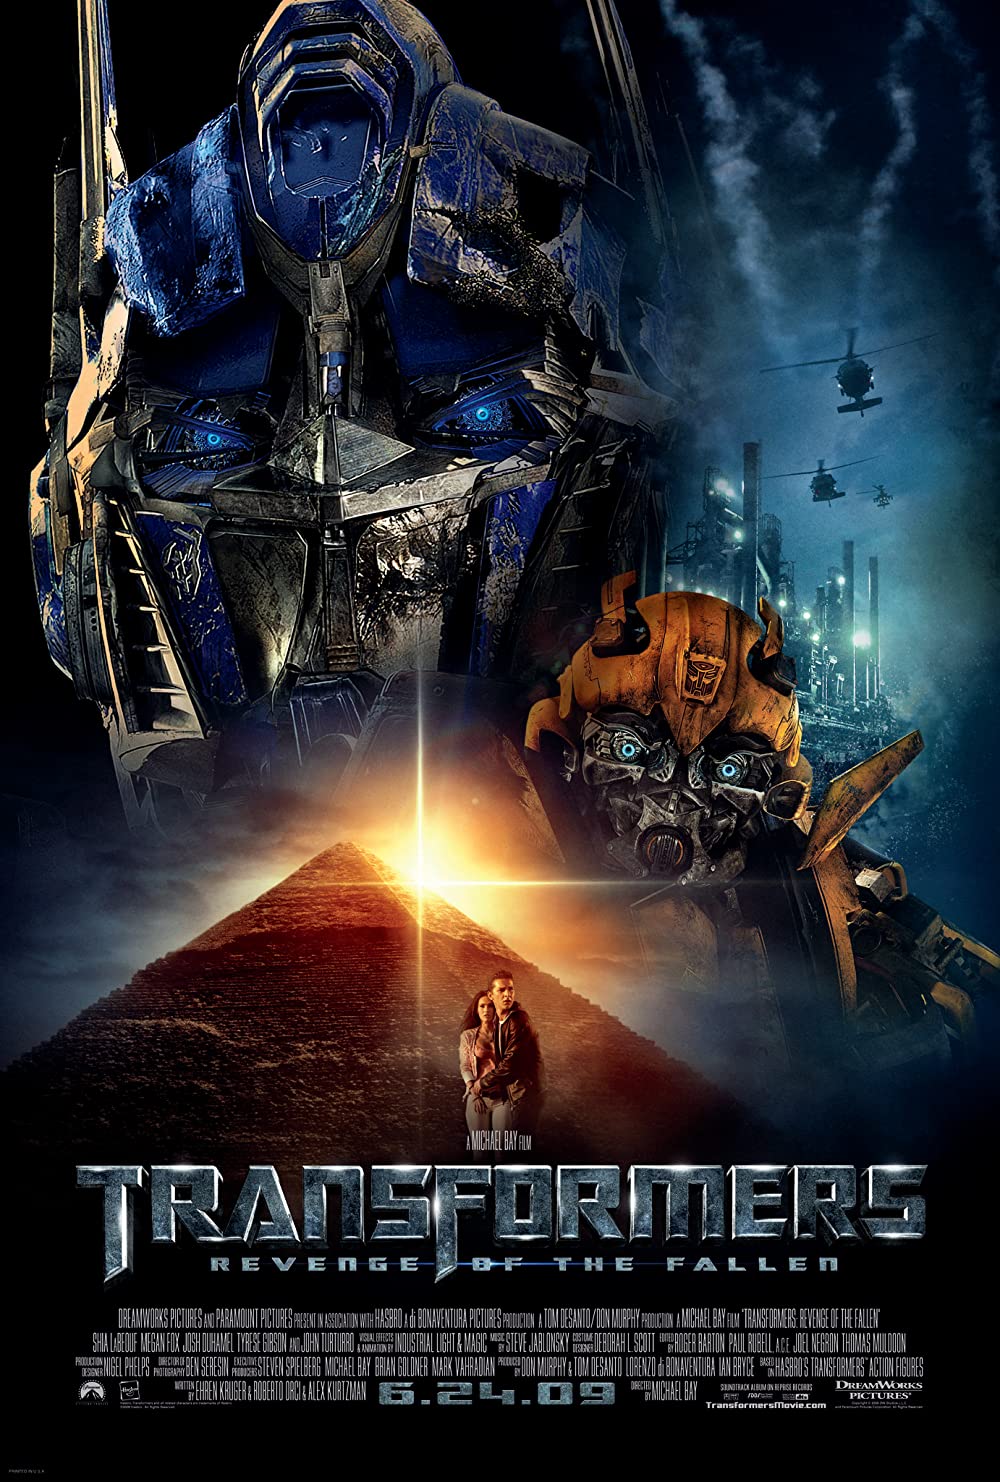 Transformers: Revenge of the Fallen Movie (2009) Watch Online, Cast, Story, Budget, Collection, Release Date, Poster, Trailer, Review